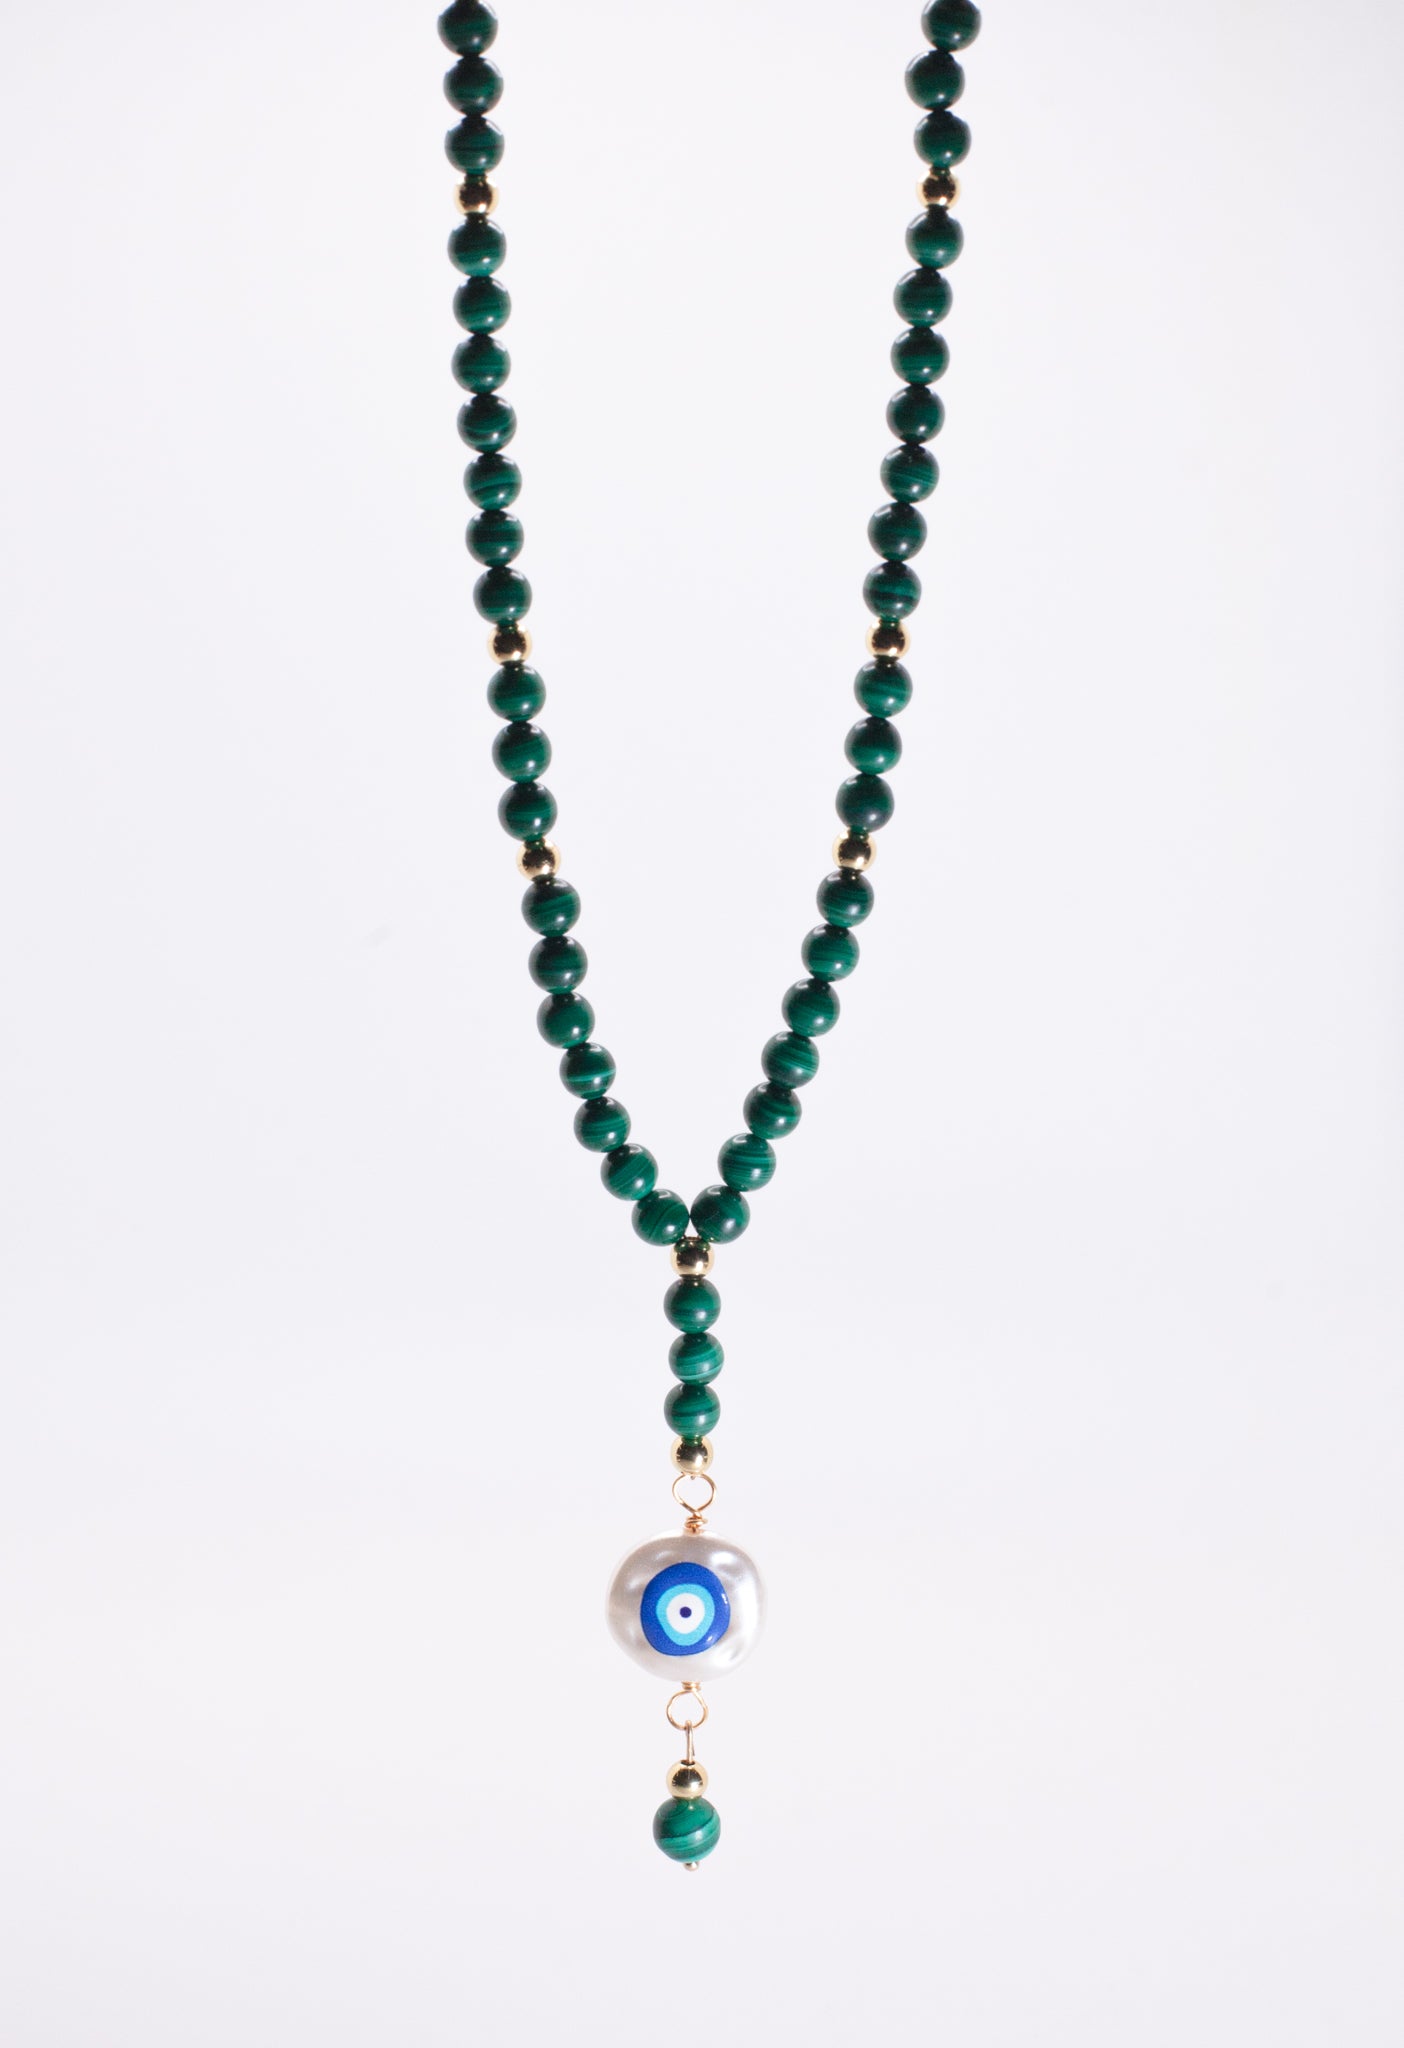 Earth Goddess Necklace